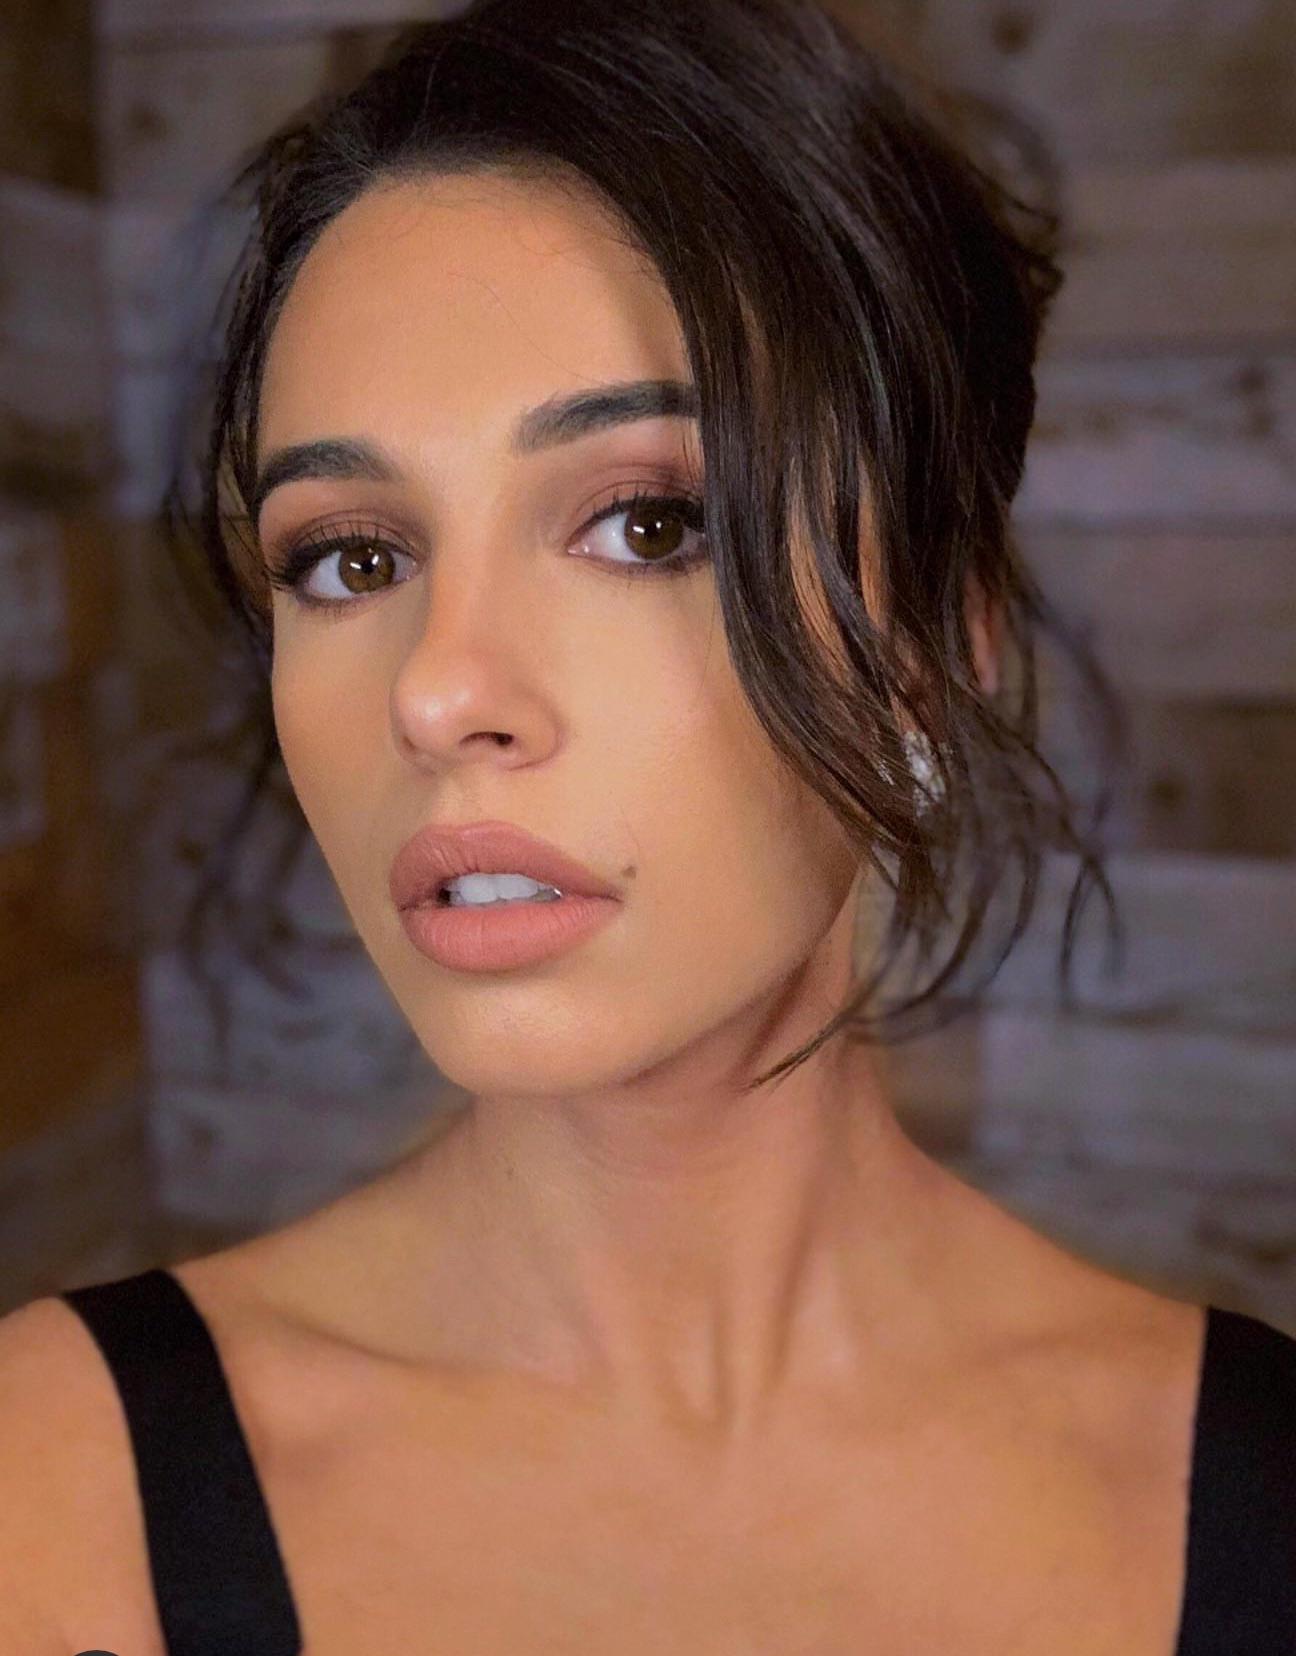 I want to cum on Naomi Scotts gorgeous face so